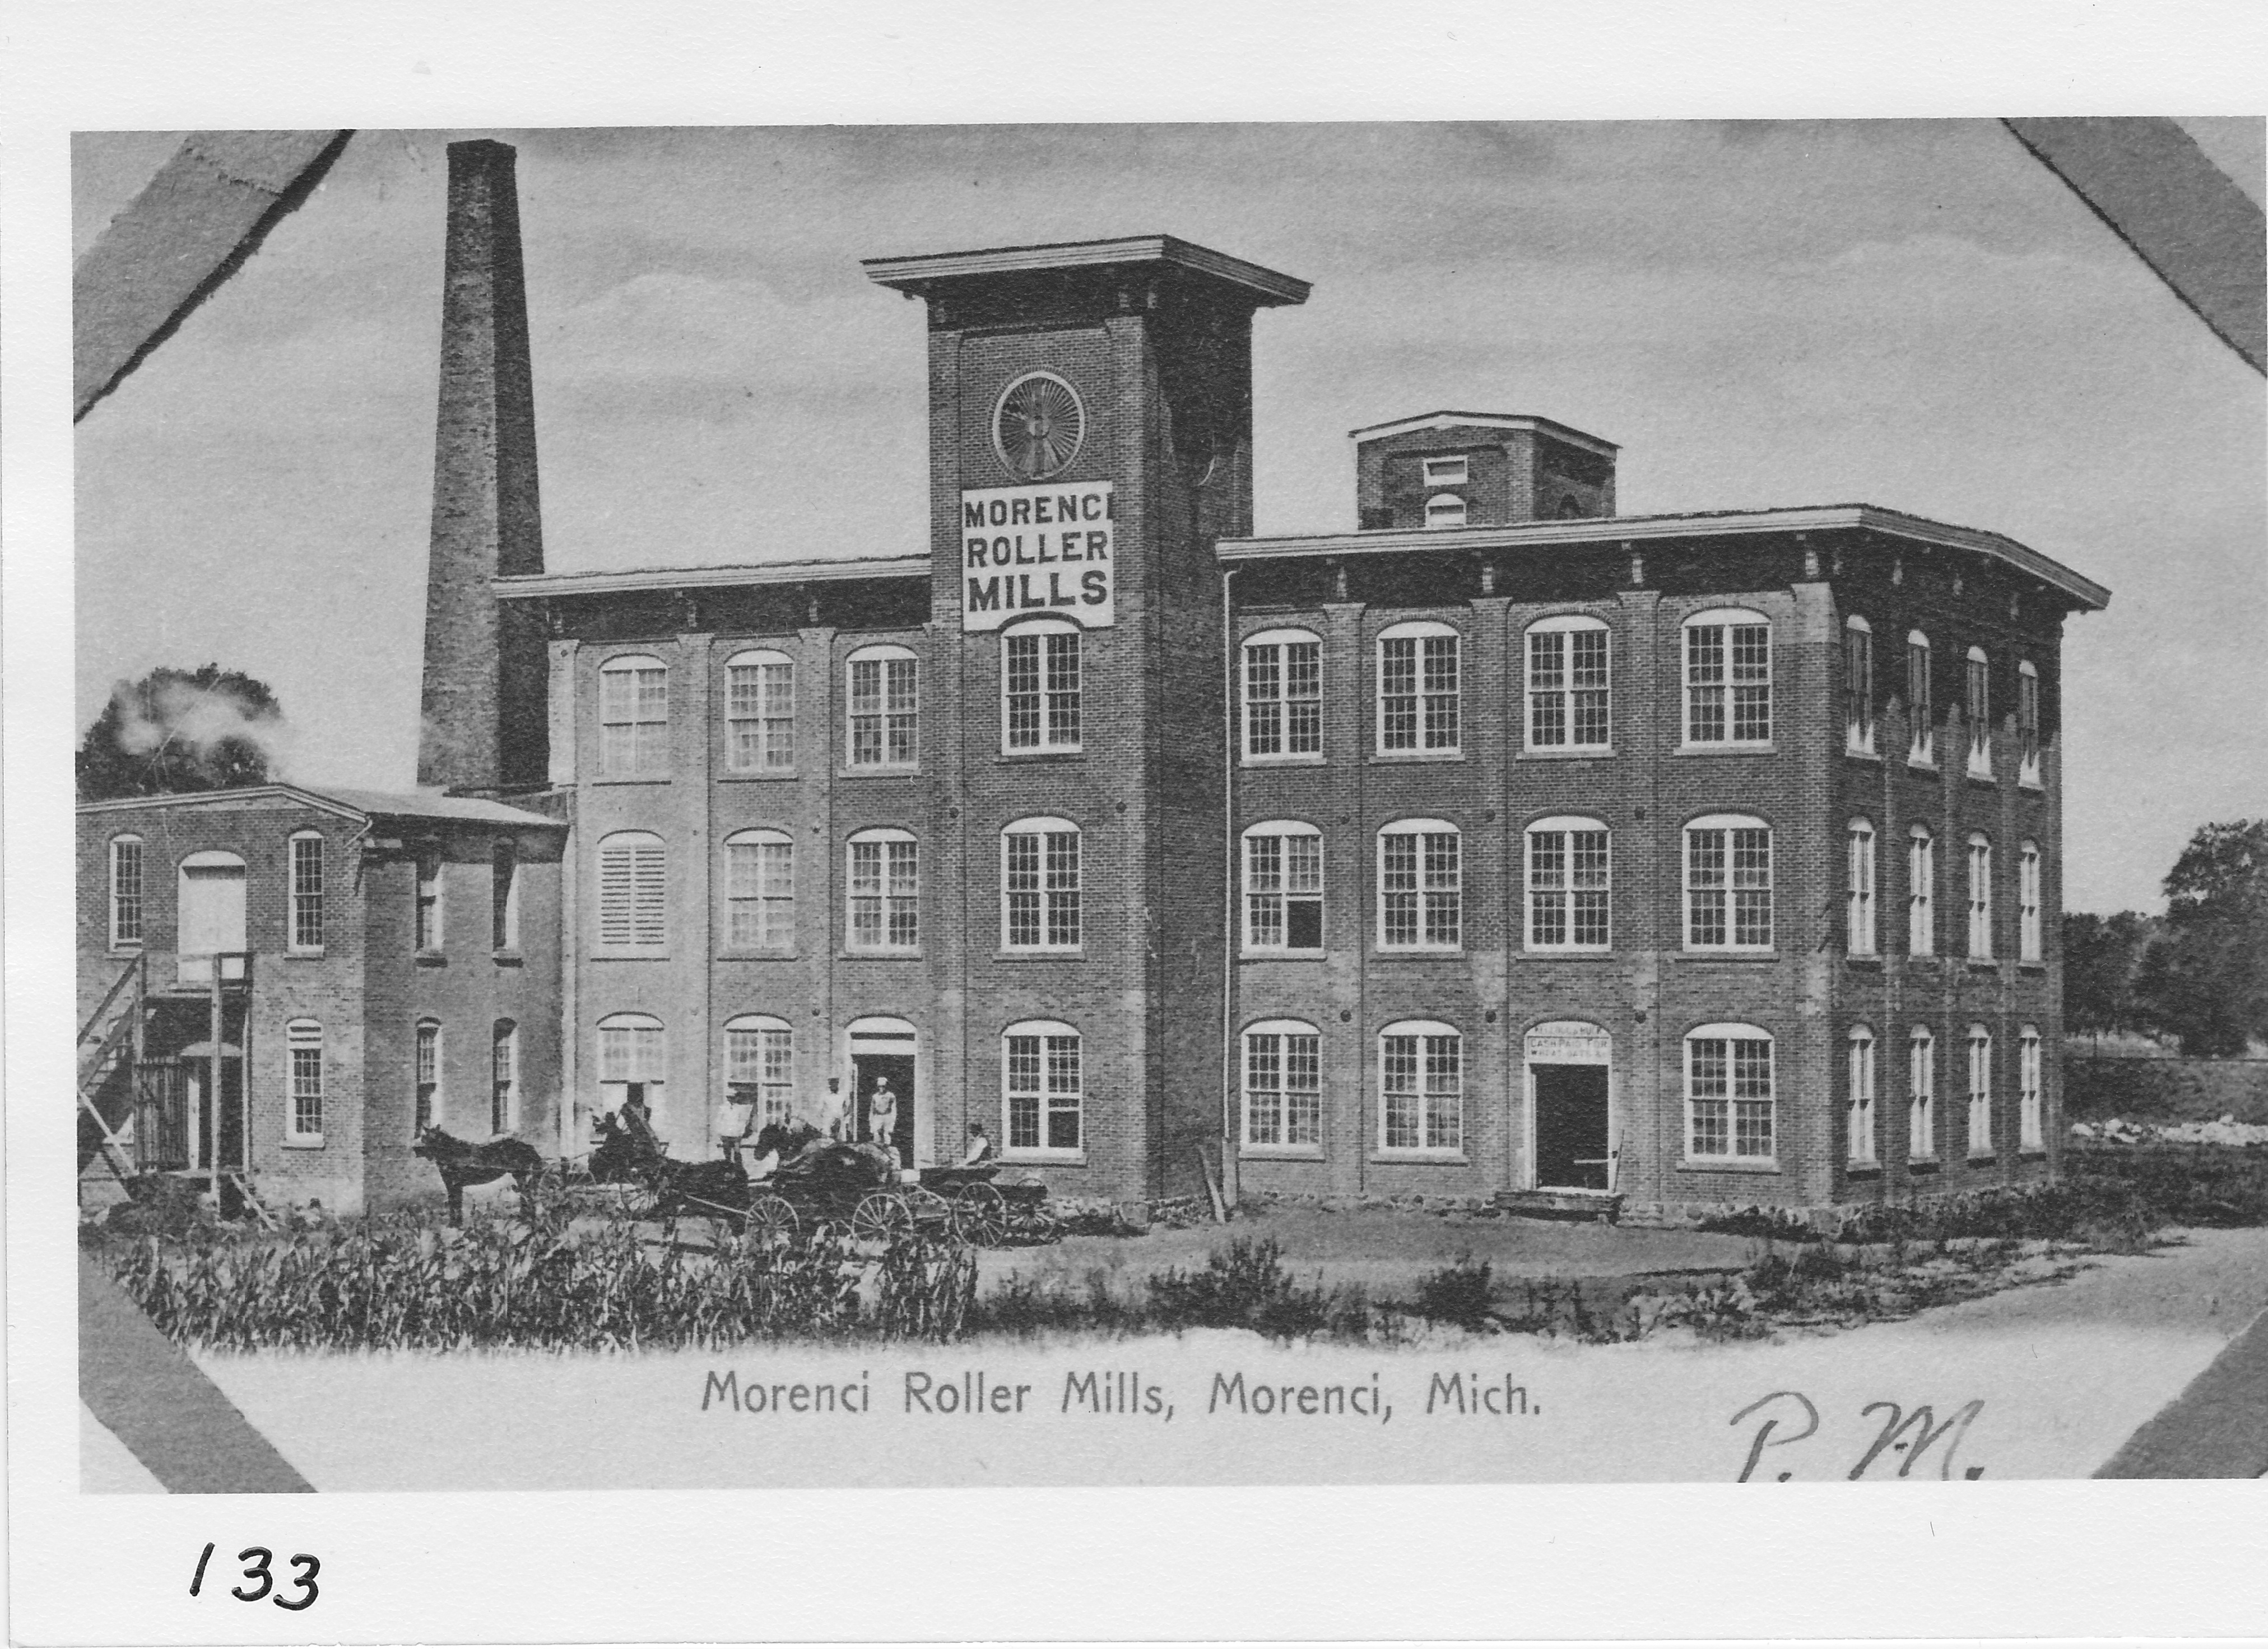 Morenci Roller Mills (Kellogg & Buck).  Built in 1865 as woolen mill and demolished in 1972.